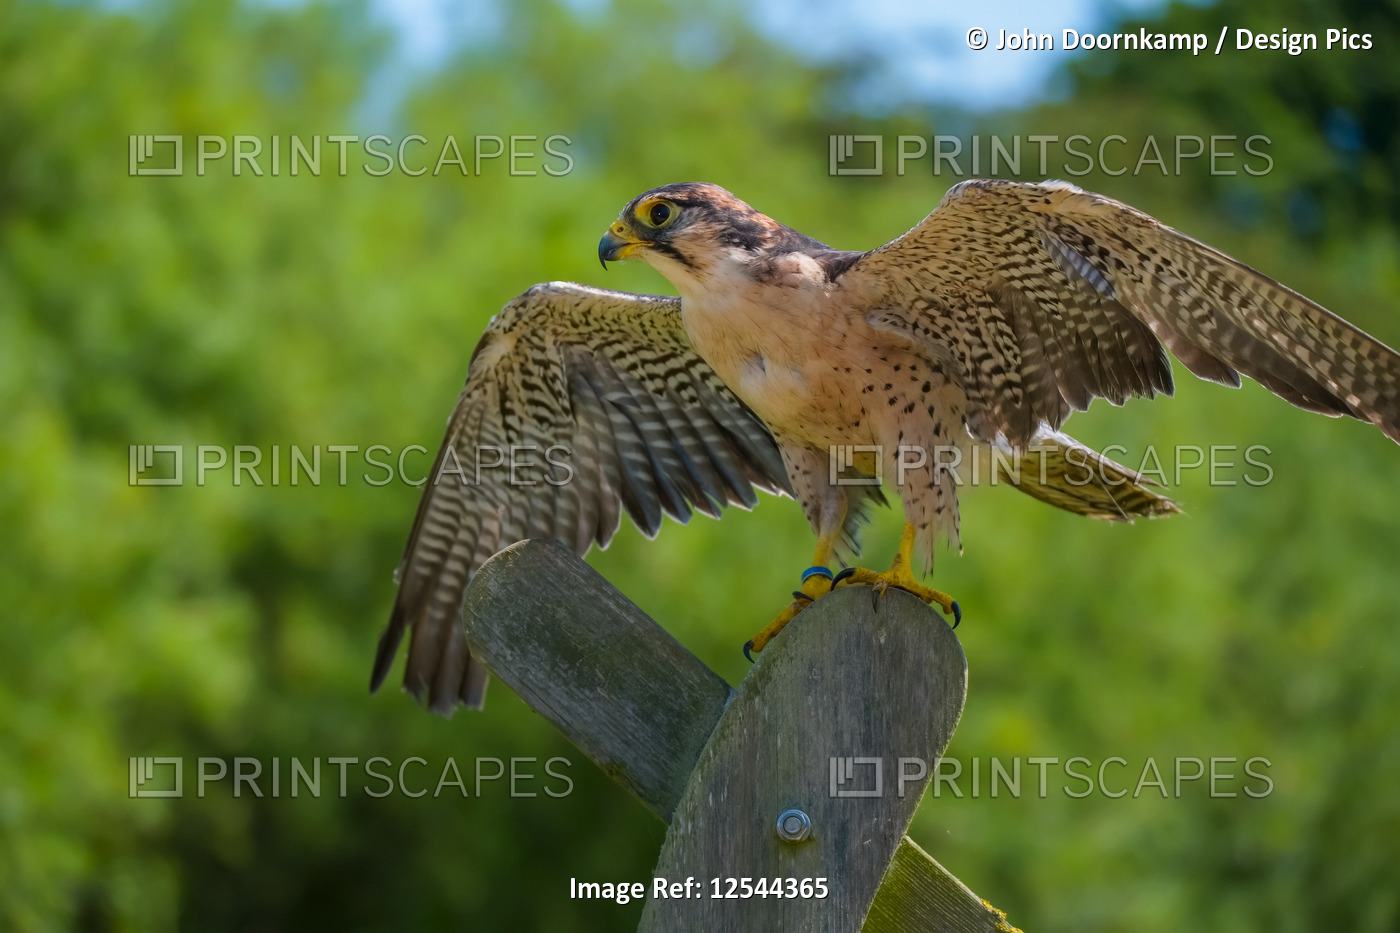 RINGED LANNER FALCON WITH WINGS SPREAD STANDING ON A GATE POST